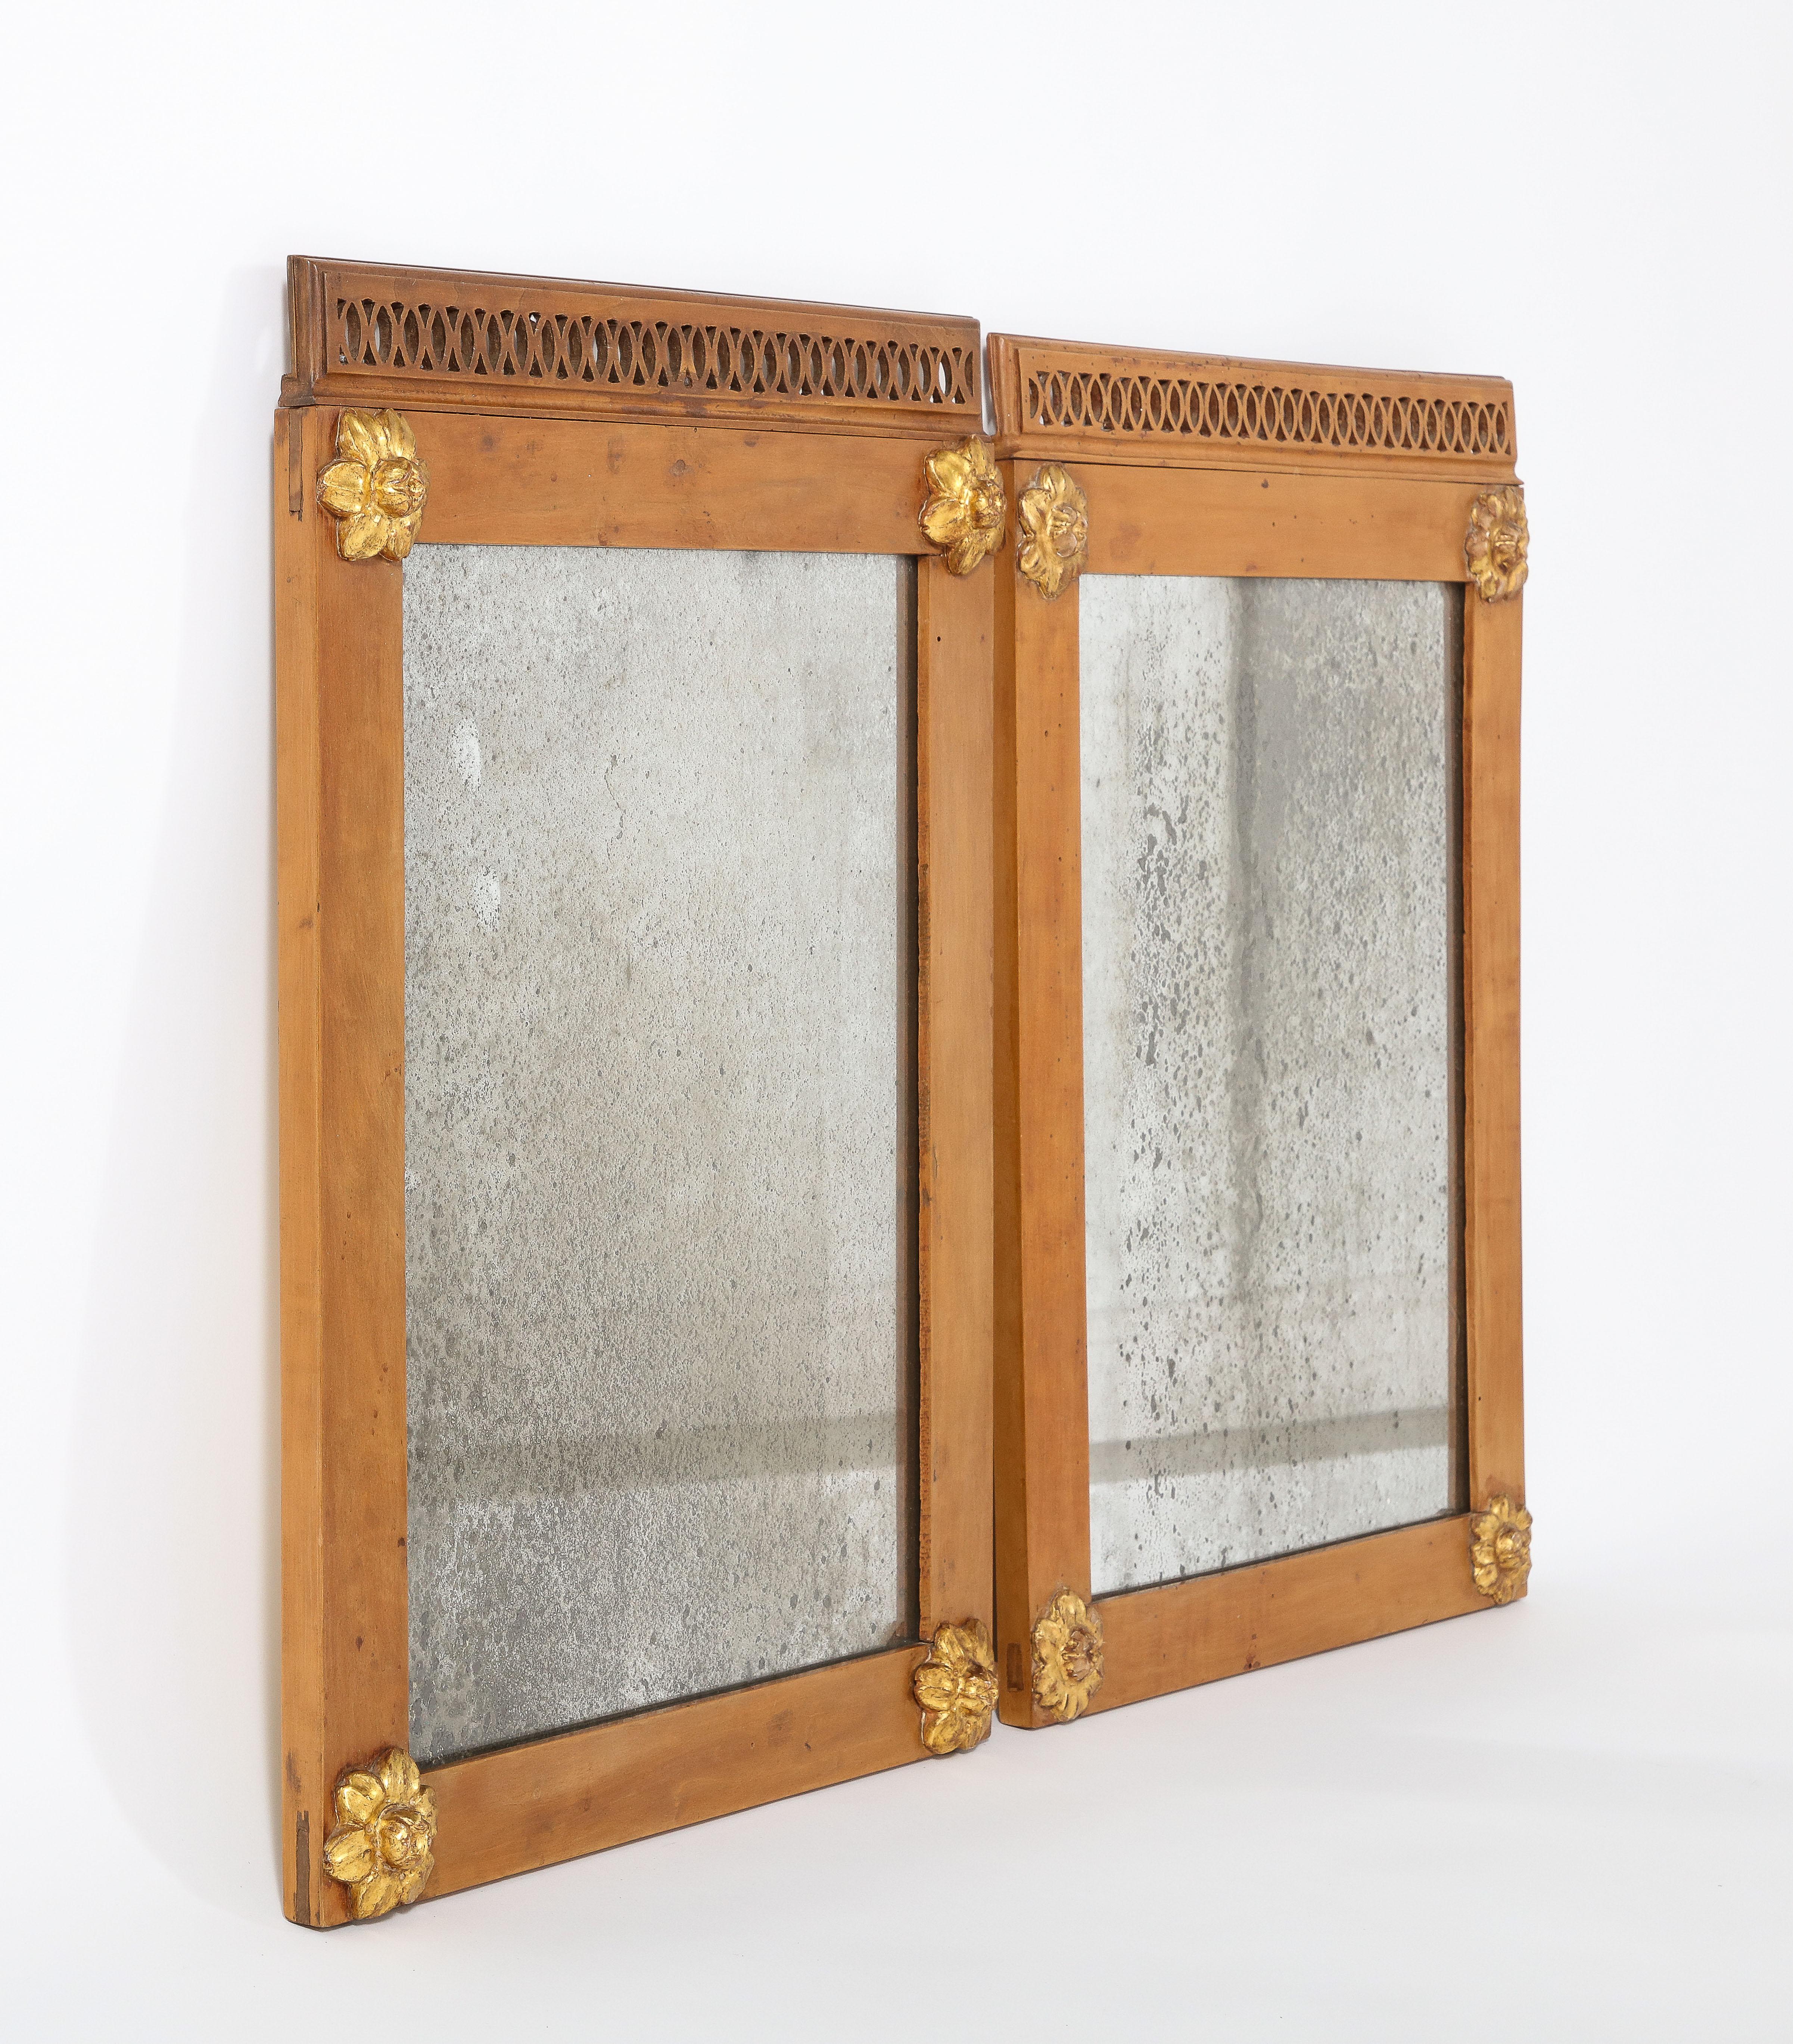 Early and rare pair of Piedmontese walnut framed mirrors with delicate carved and gilded rosettes decorating each corner, the top with cut out pierced gallery carving, with its original mercury glass. A beautiful example of Italian Neoclassical